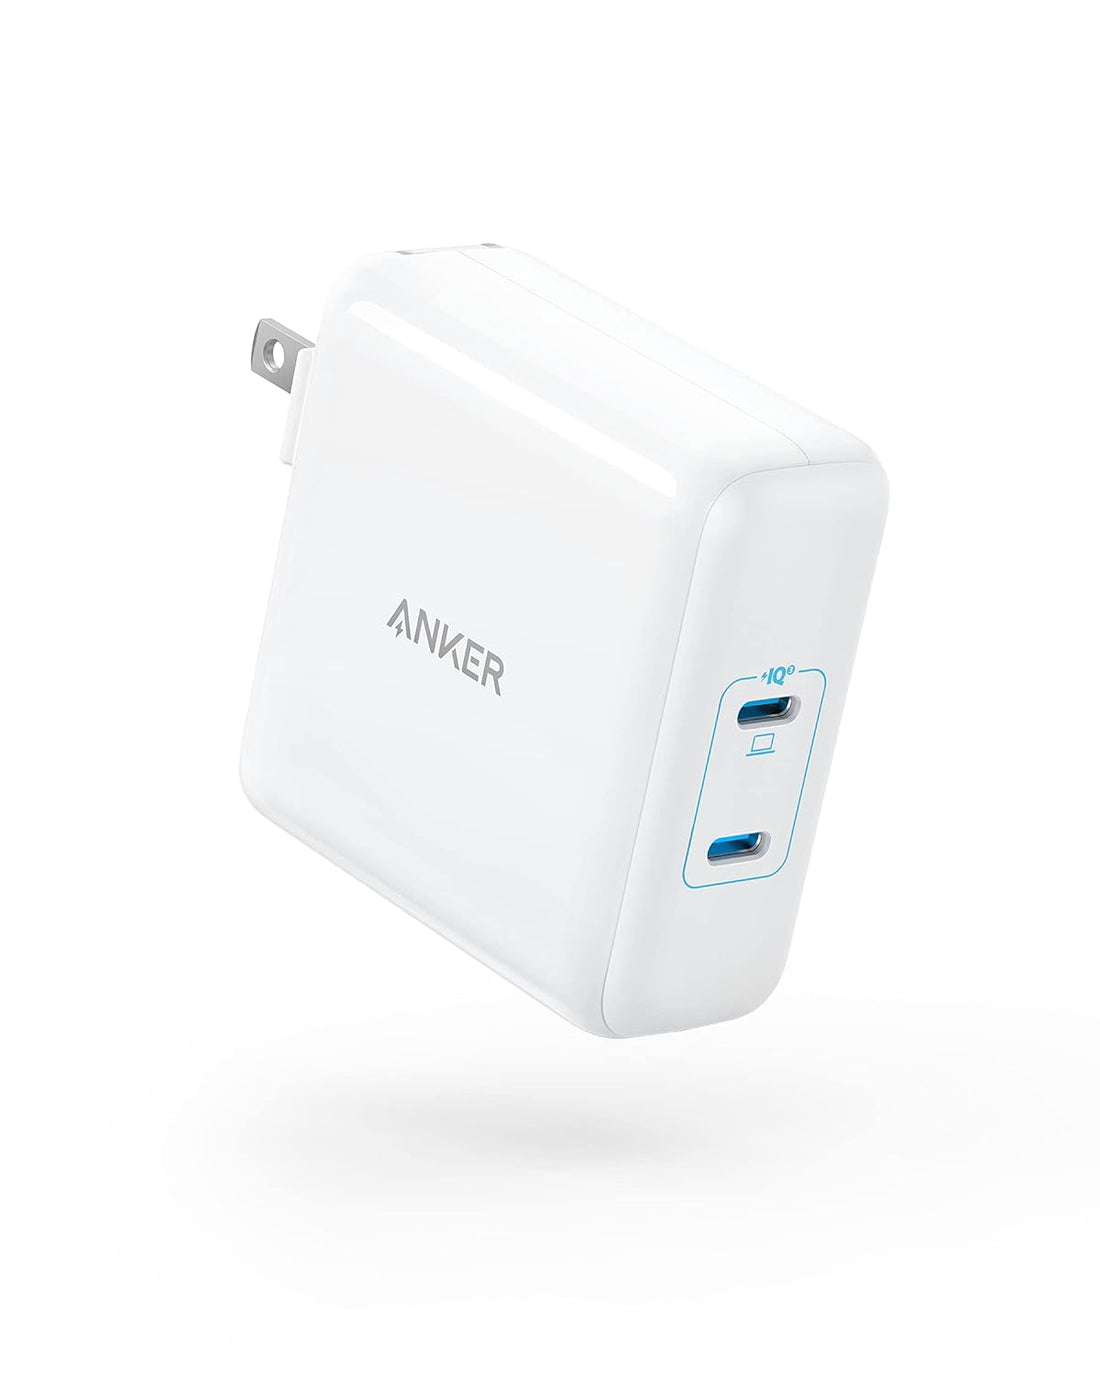 Anker PowerPort III 2-Port 100W Charger PIQ 3.0 Ultra-Powerful Fast Charger, USB C Charger for MacBook Pro/Air, iPad Pro, iPhone 12/12 Pro/11, Galaxy/Note, Pixel and More (Cable Not Included)-White